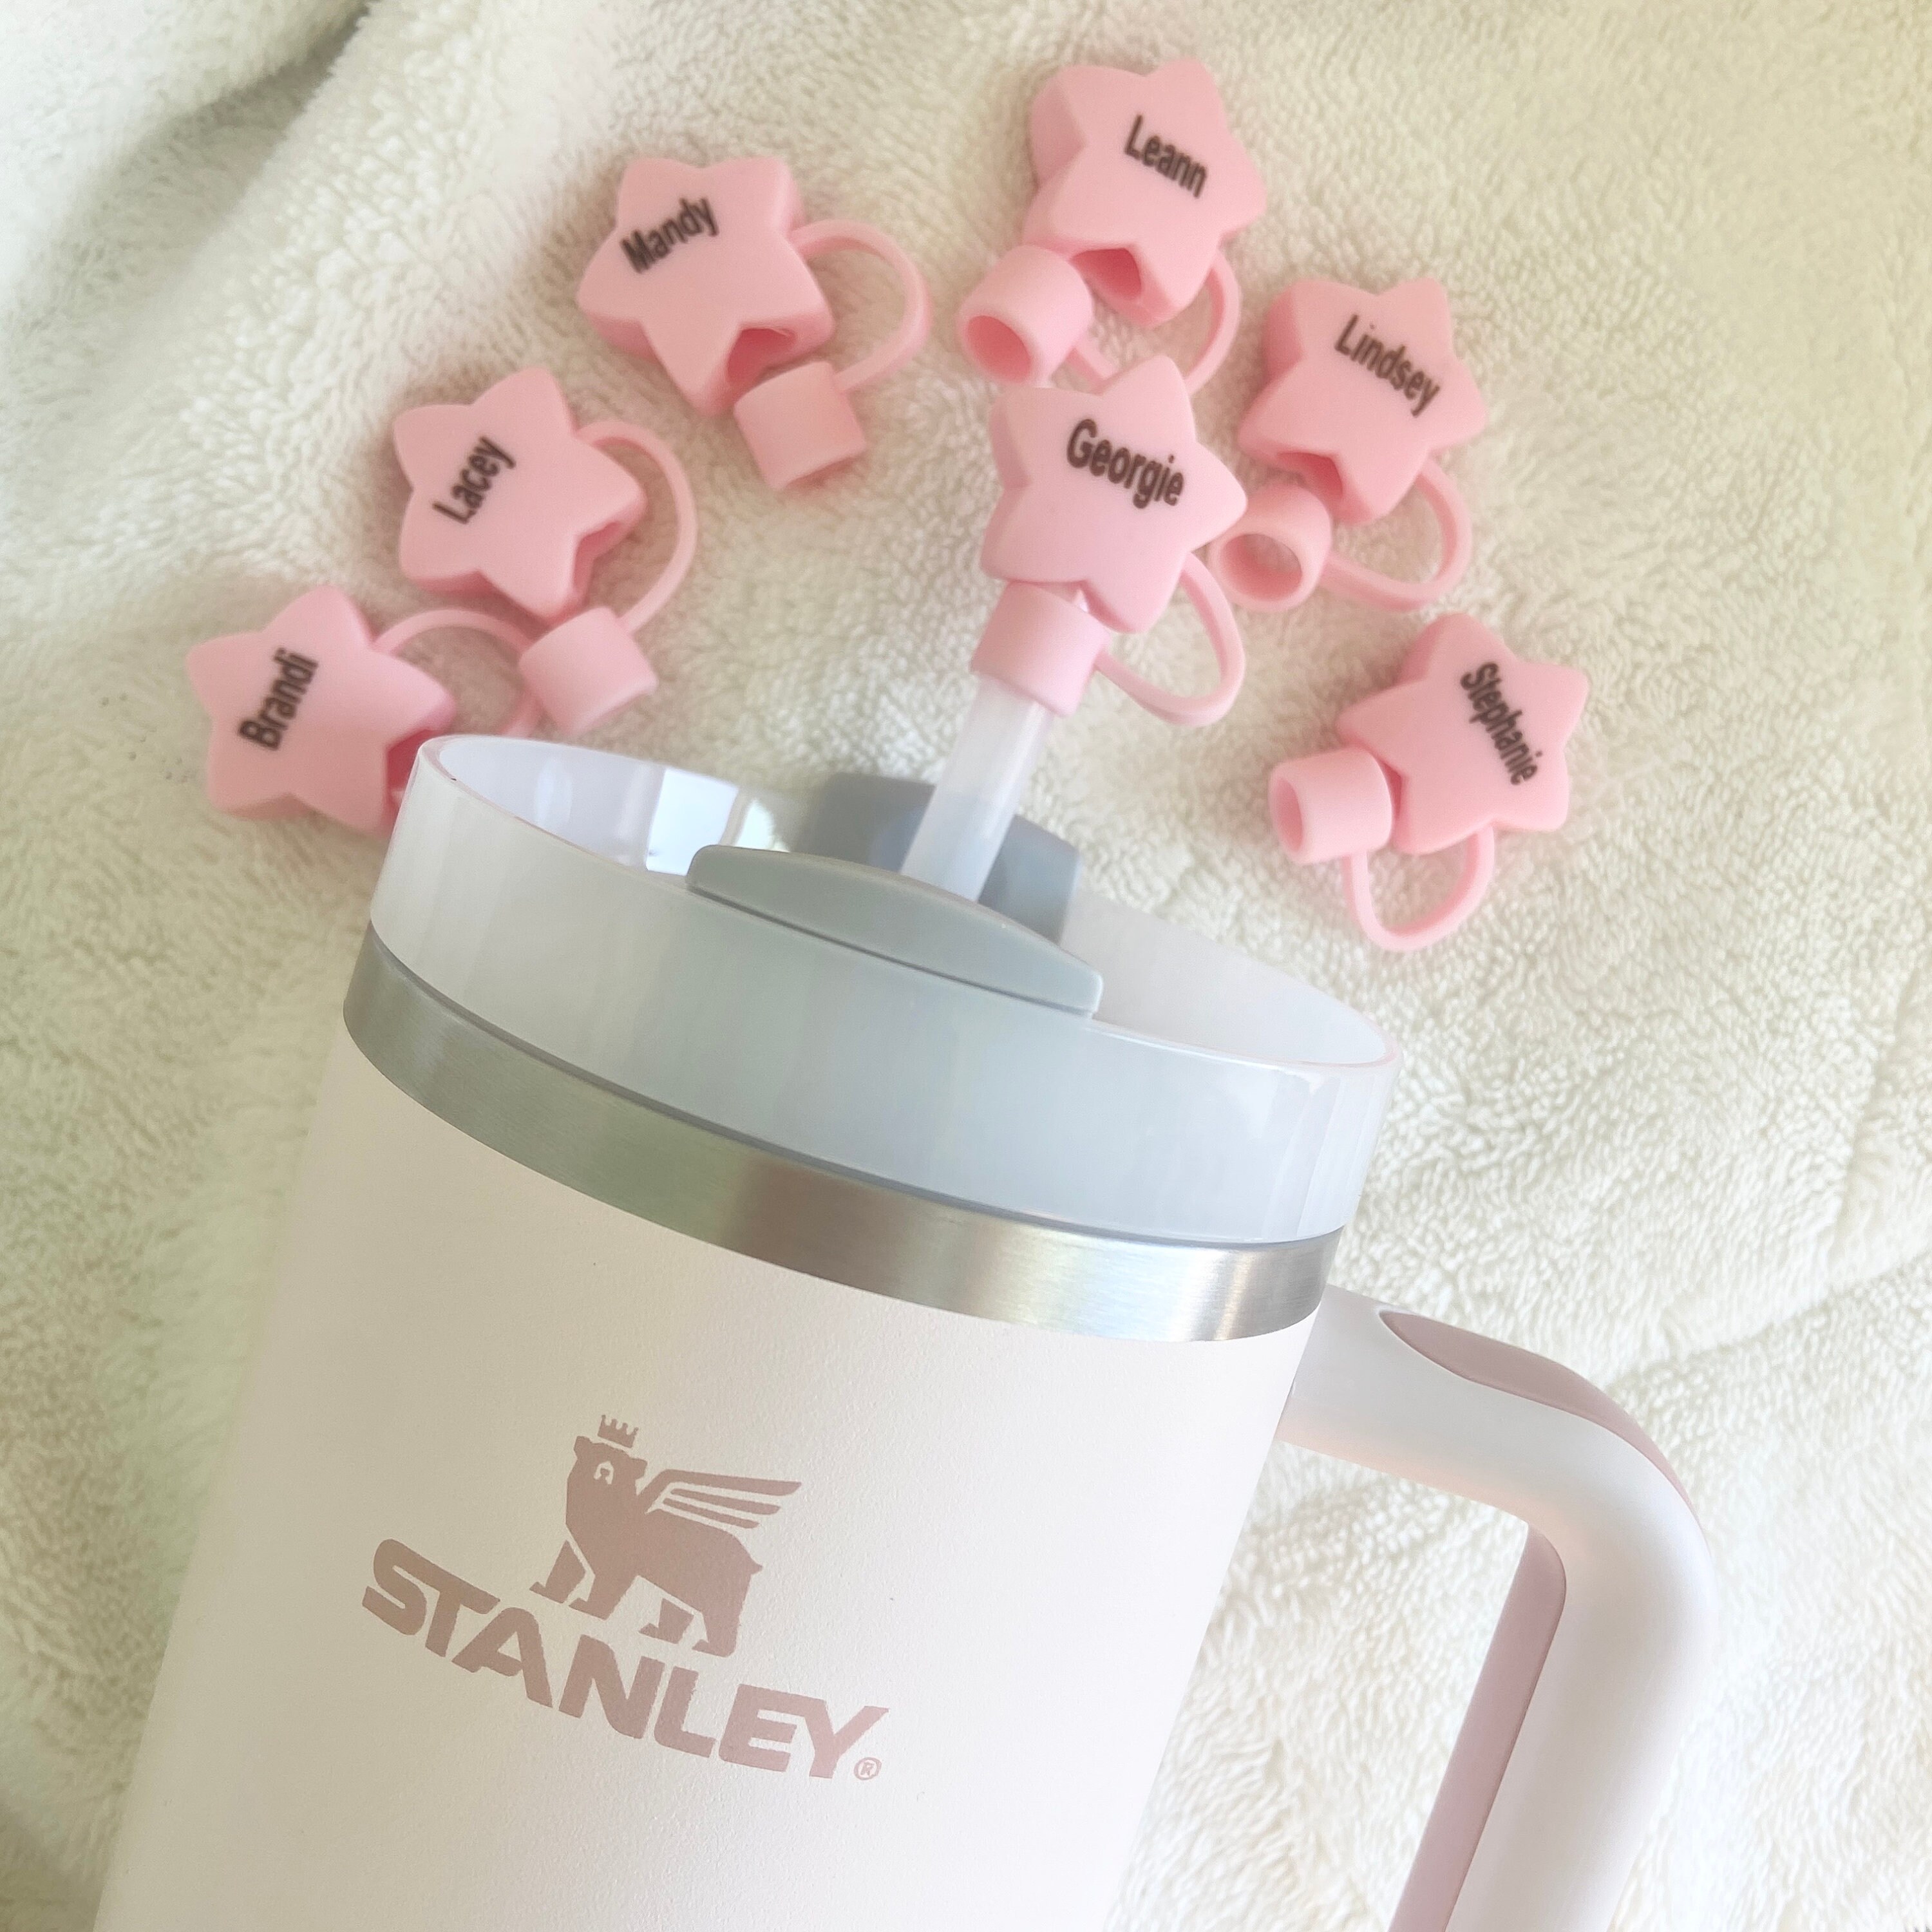 New Stanley + Straw Toppers, Gallery posted by JeN Marie 🪩